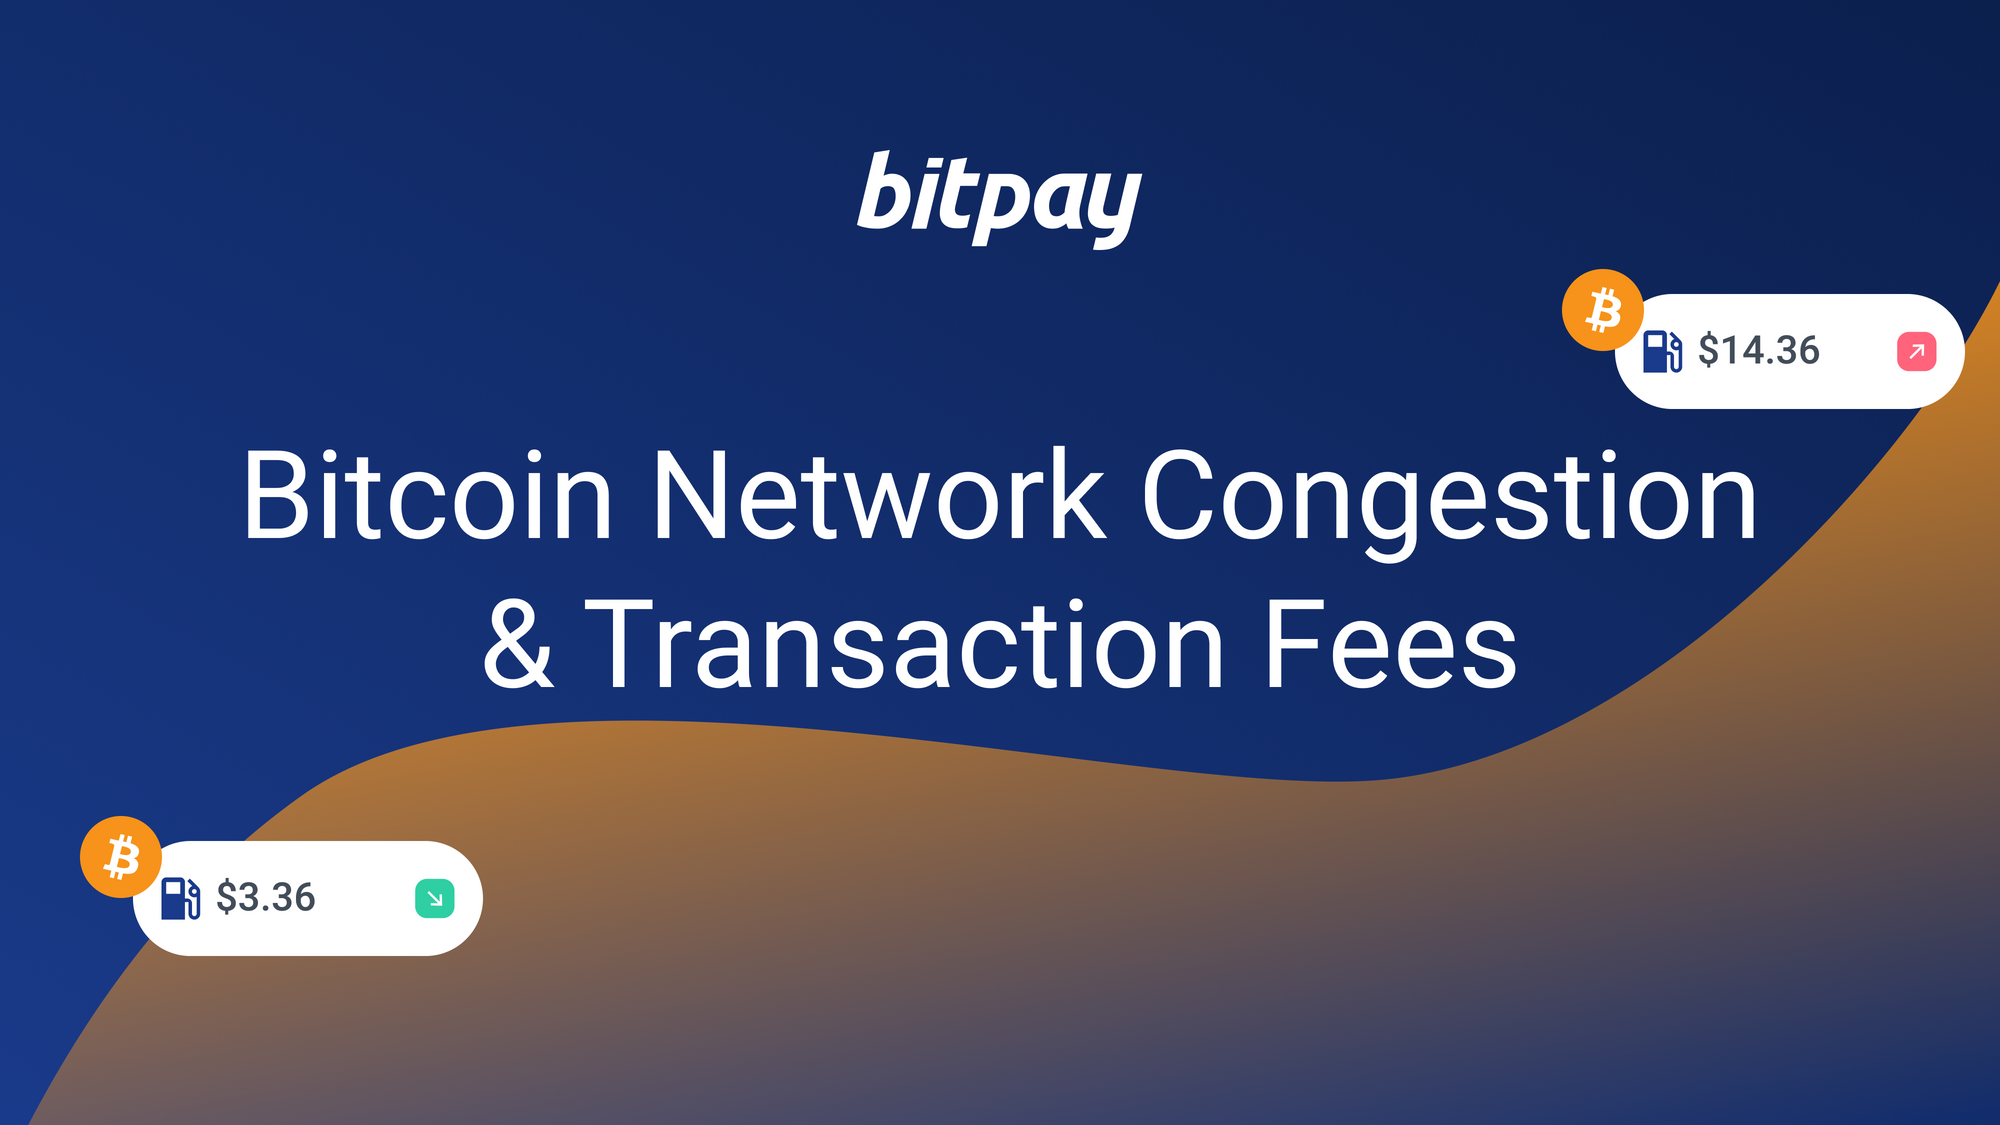 What’s Going On with Bitcoin Congestion and Transaction Fees? Plus, A Reminder On How to Save When Paying with Bitcoin